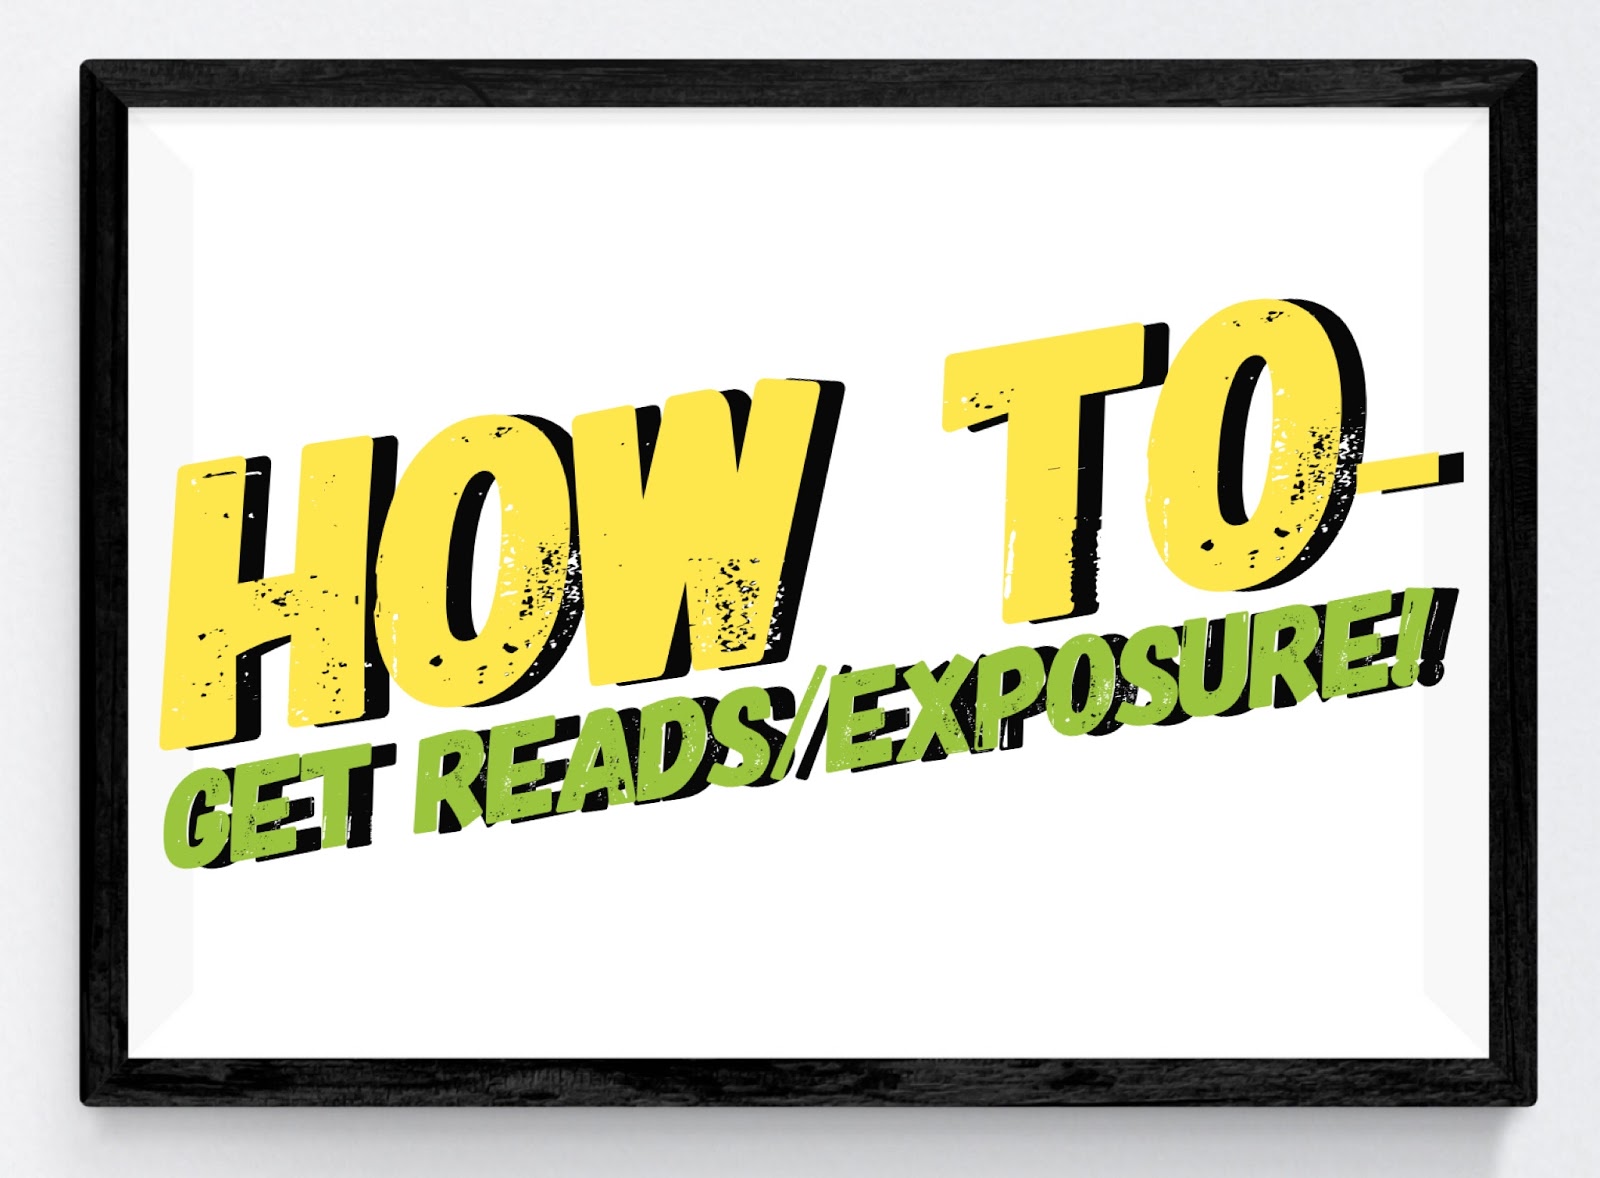 How To – Get More Reads/Exposure!